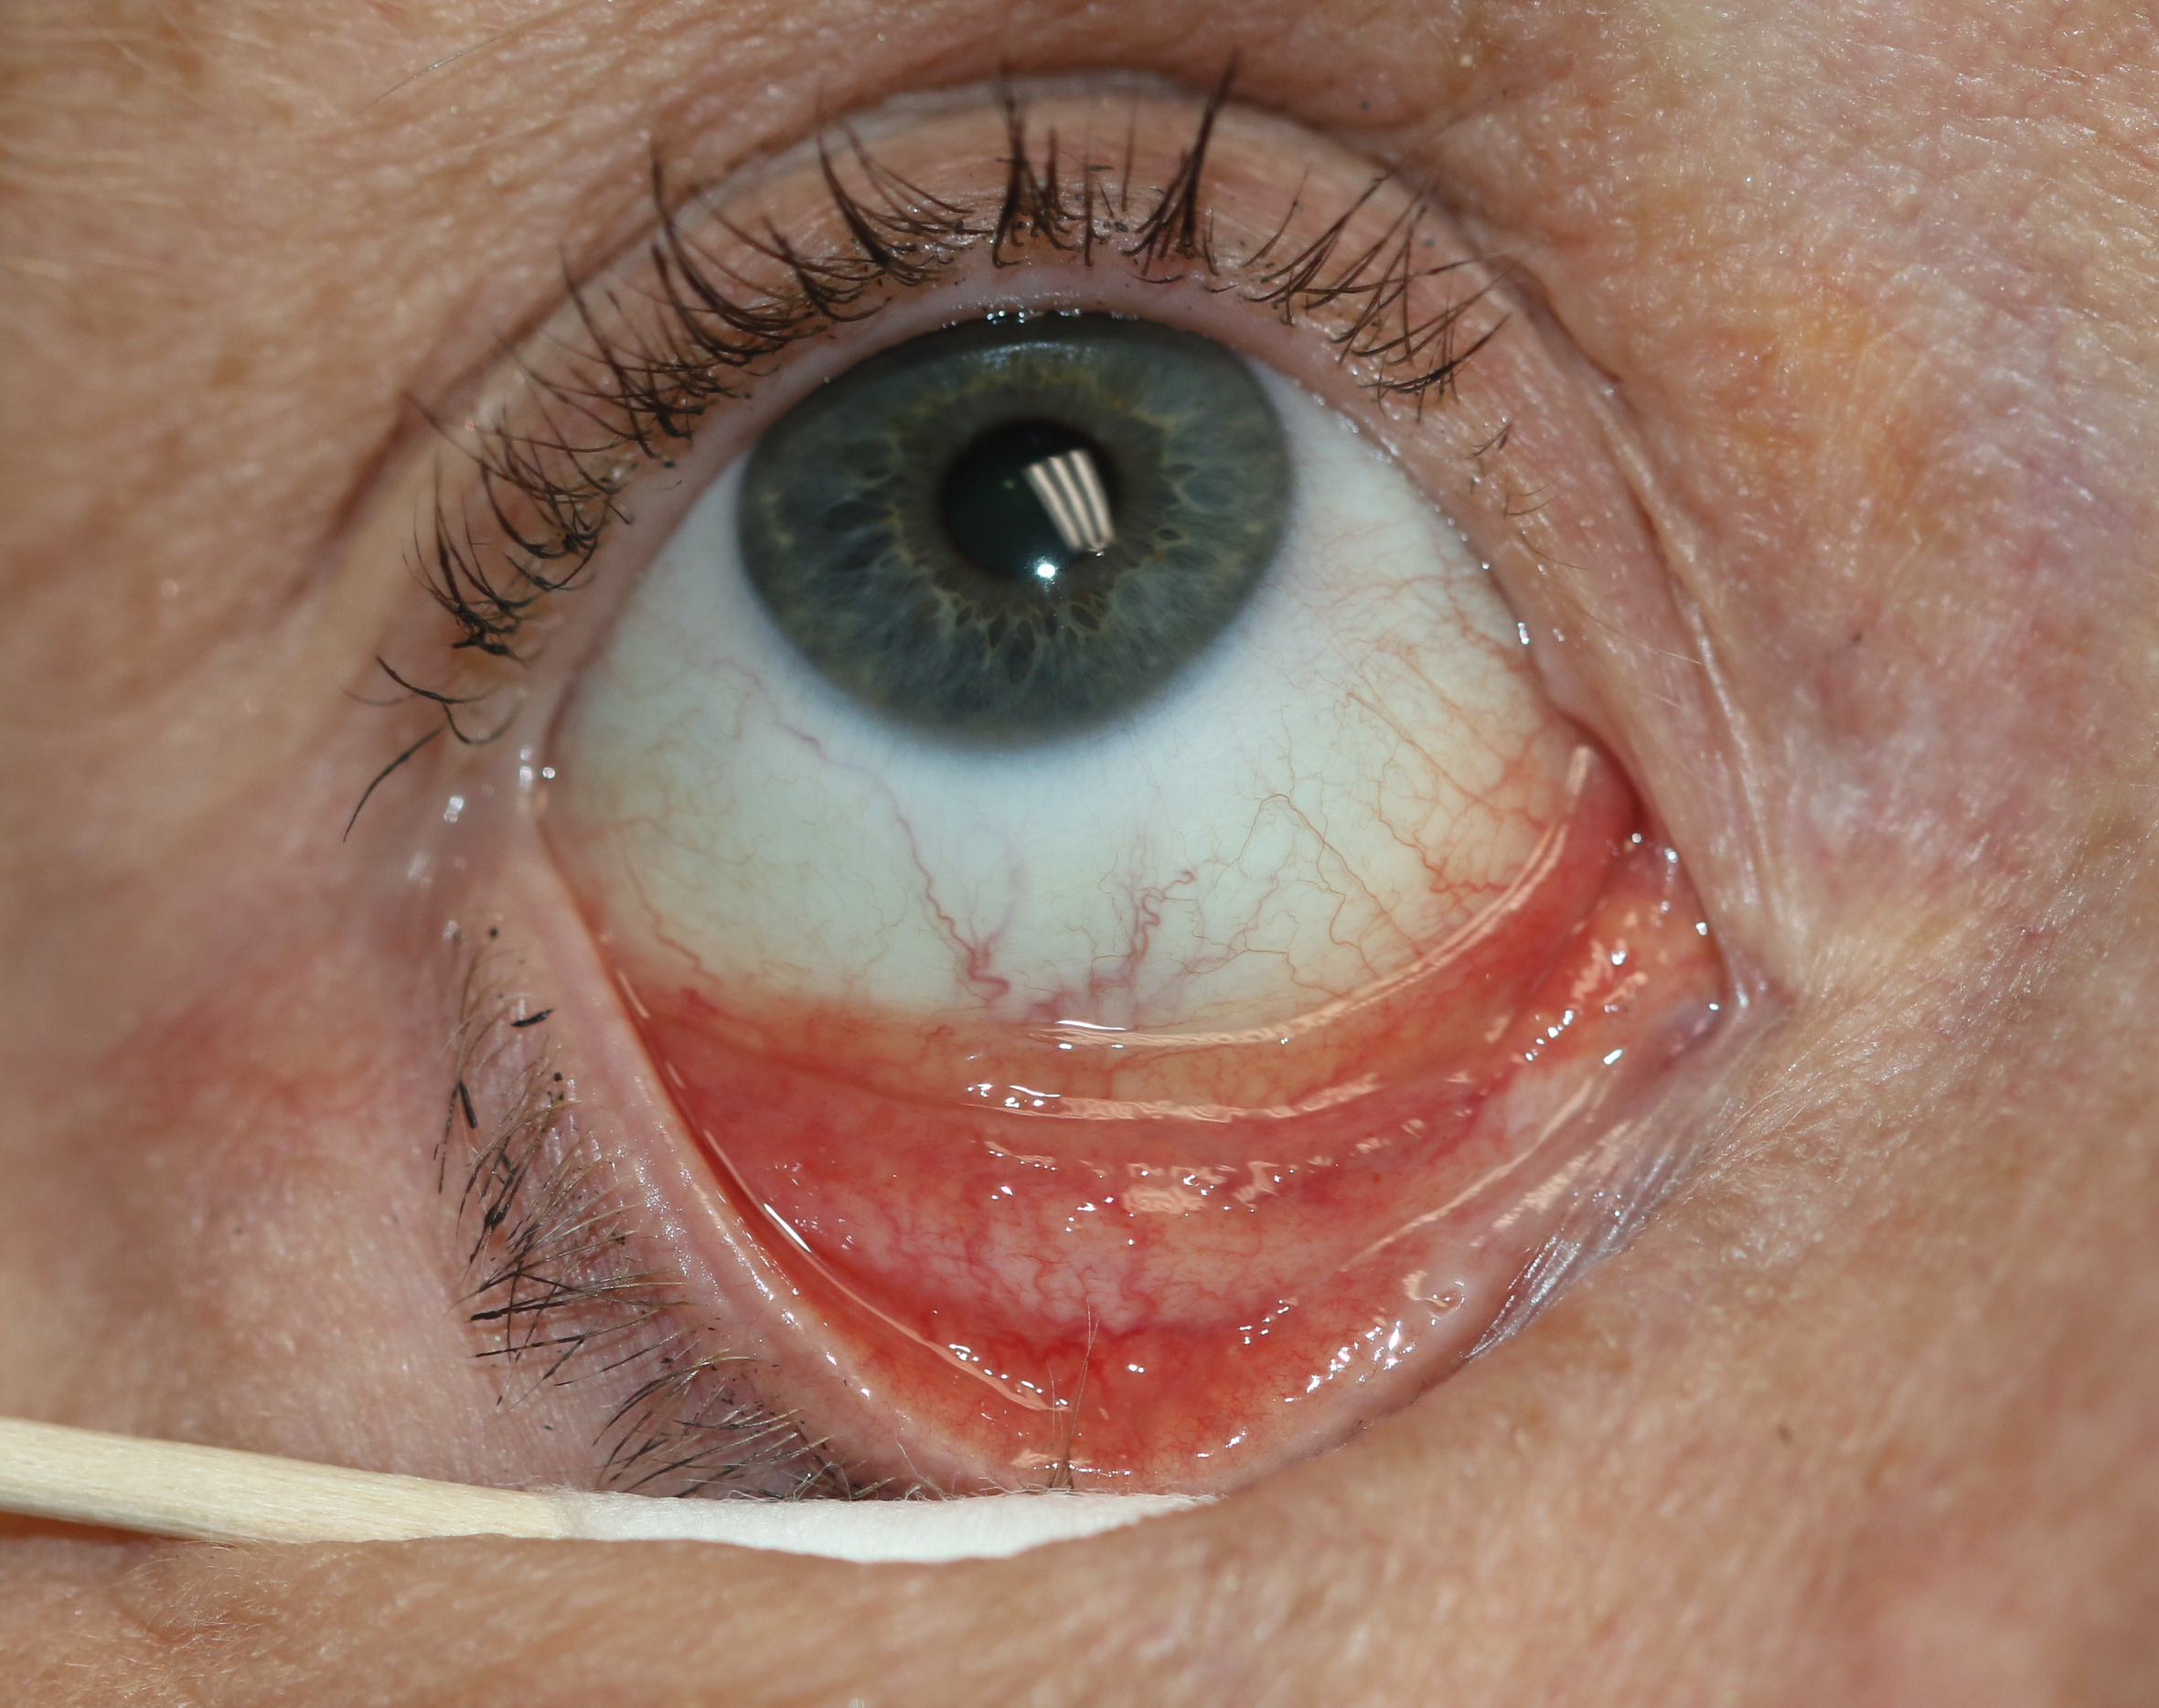 Follicular conjunctivitis may be seen with viral infections like herpes zoster, Epstein-Barr virus infection, infectious mononucleosis), chlamydial infections, and in reaction of topical medications and molluscum contagiosum. Follicular conjunctivitis has been described in patients with the Clovid-19 infection (coronavirus infection). The inferior and superior tarsal conjunctiva and the fornices show gray-white elevated swellings which are about 105 - 1 mm in diameter and have a velvety appearance